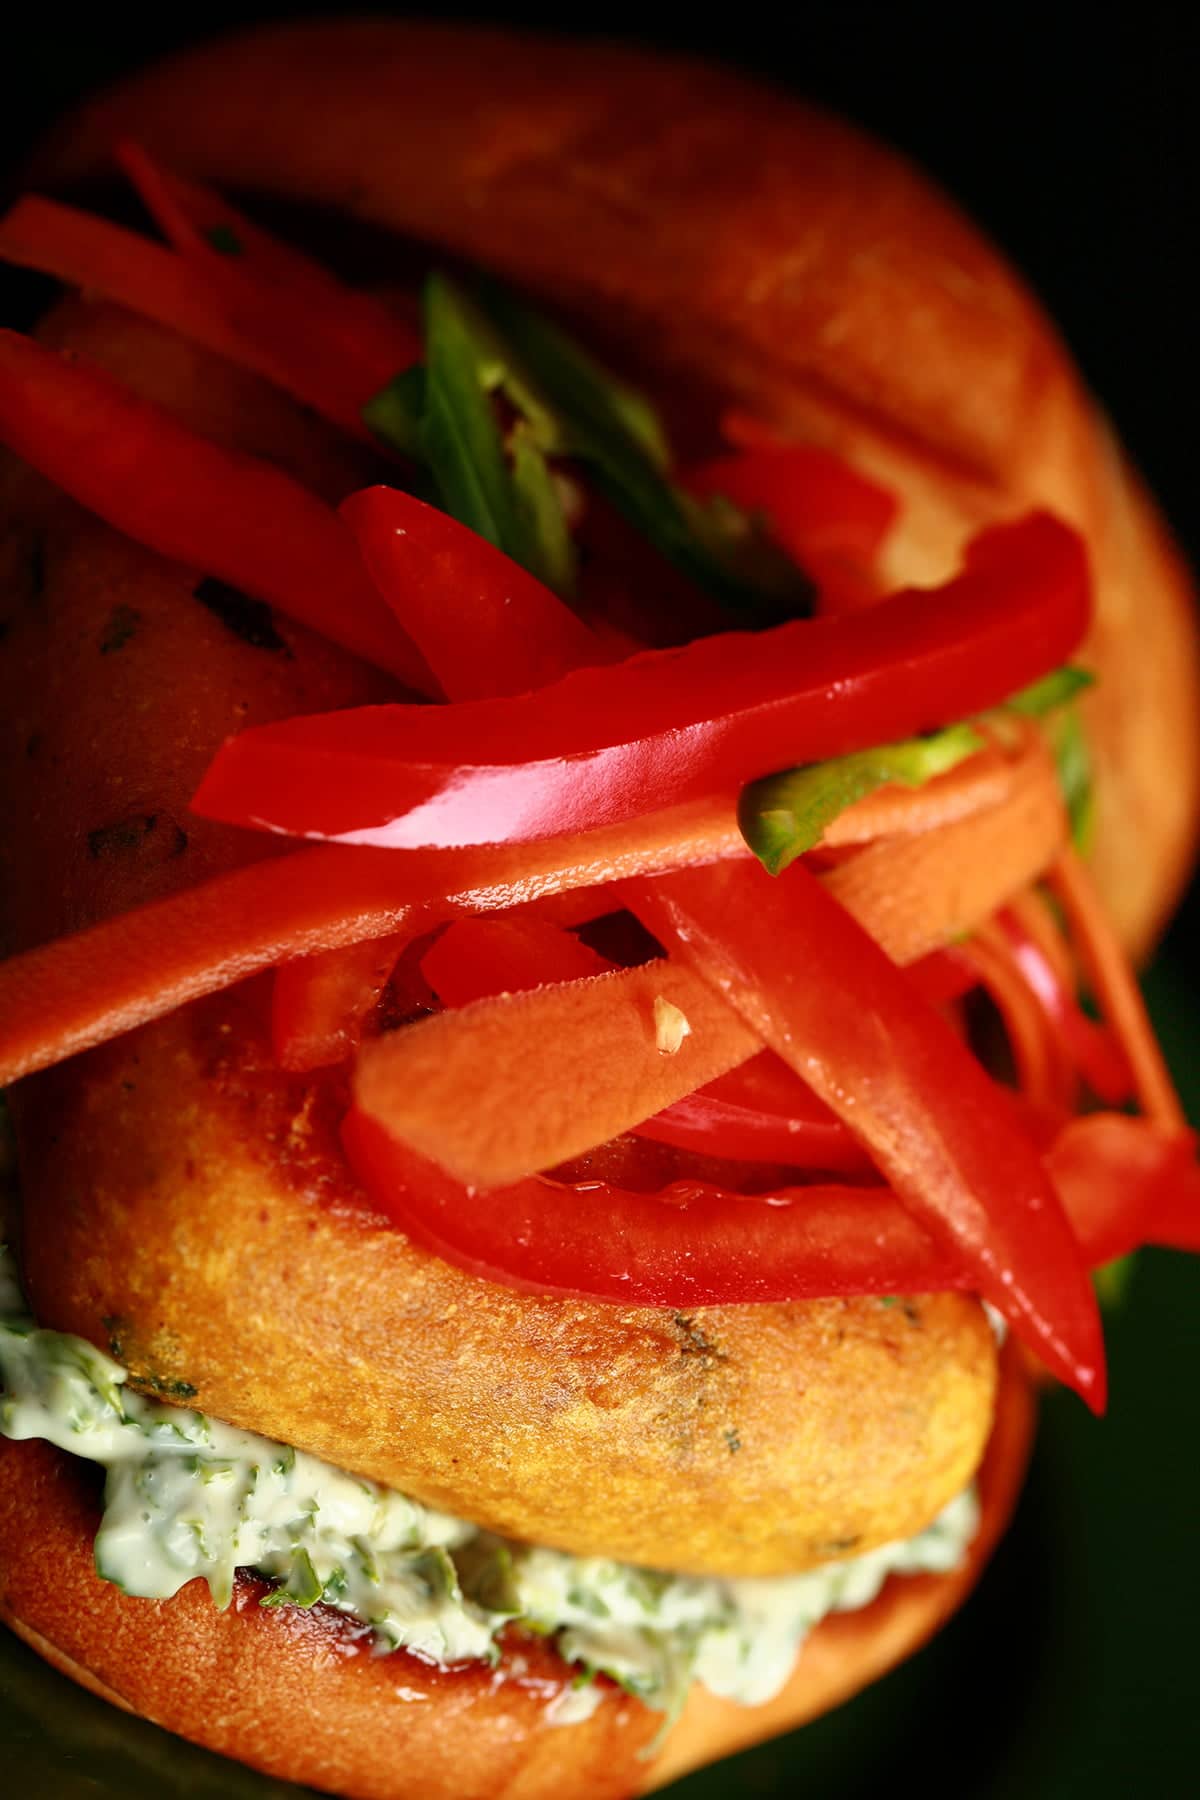 A very close up view of an "Indian Cheeseburger" - a pakora battered patty of paneer, with cilantro-mint mayonnaise and a pickled slaw made of red peppers, carrots, and jalapenos, on a bun.